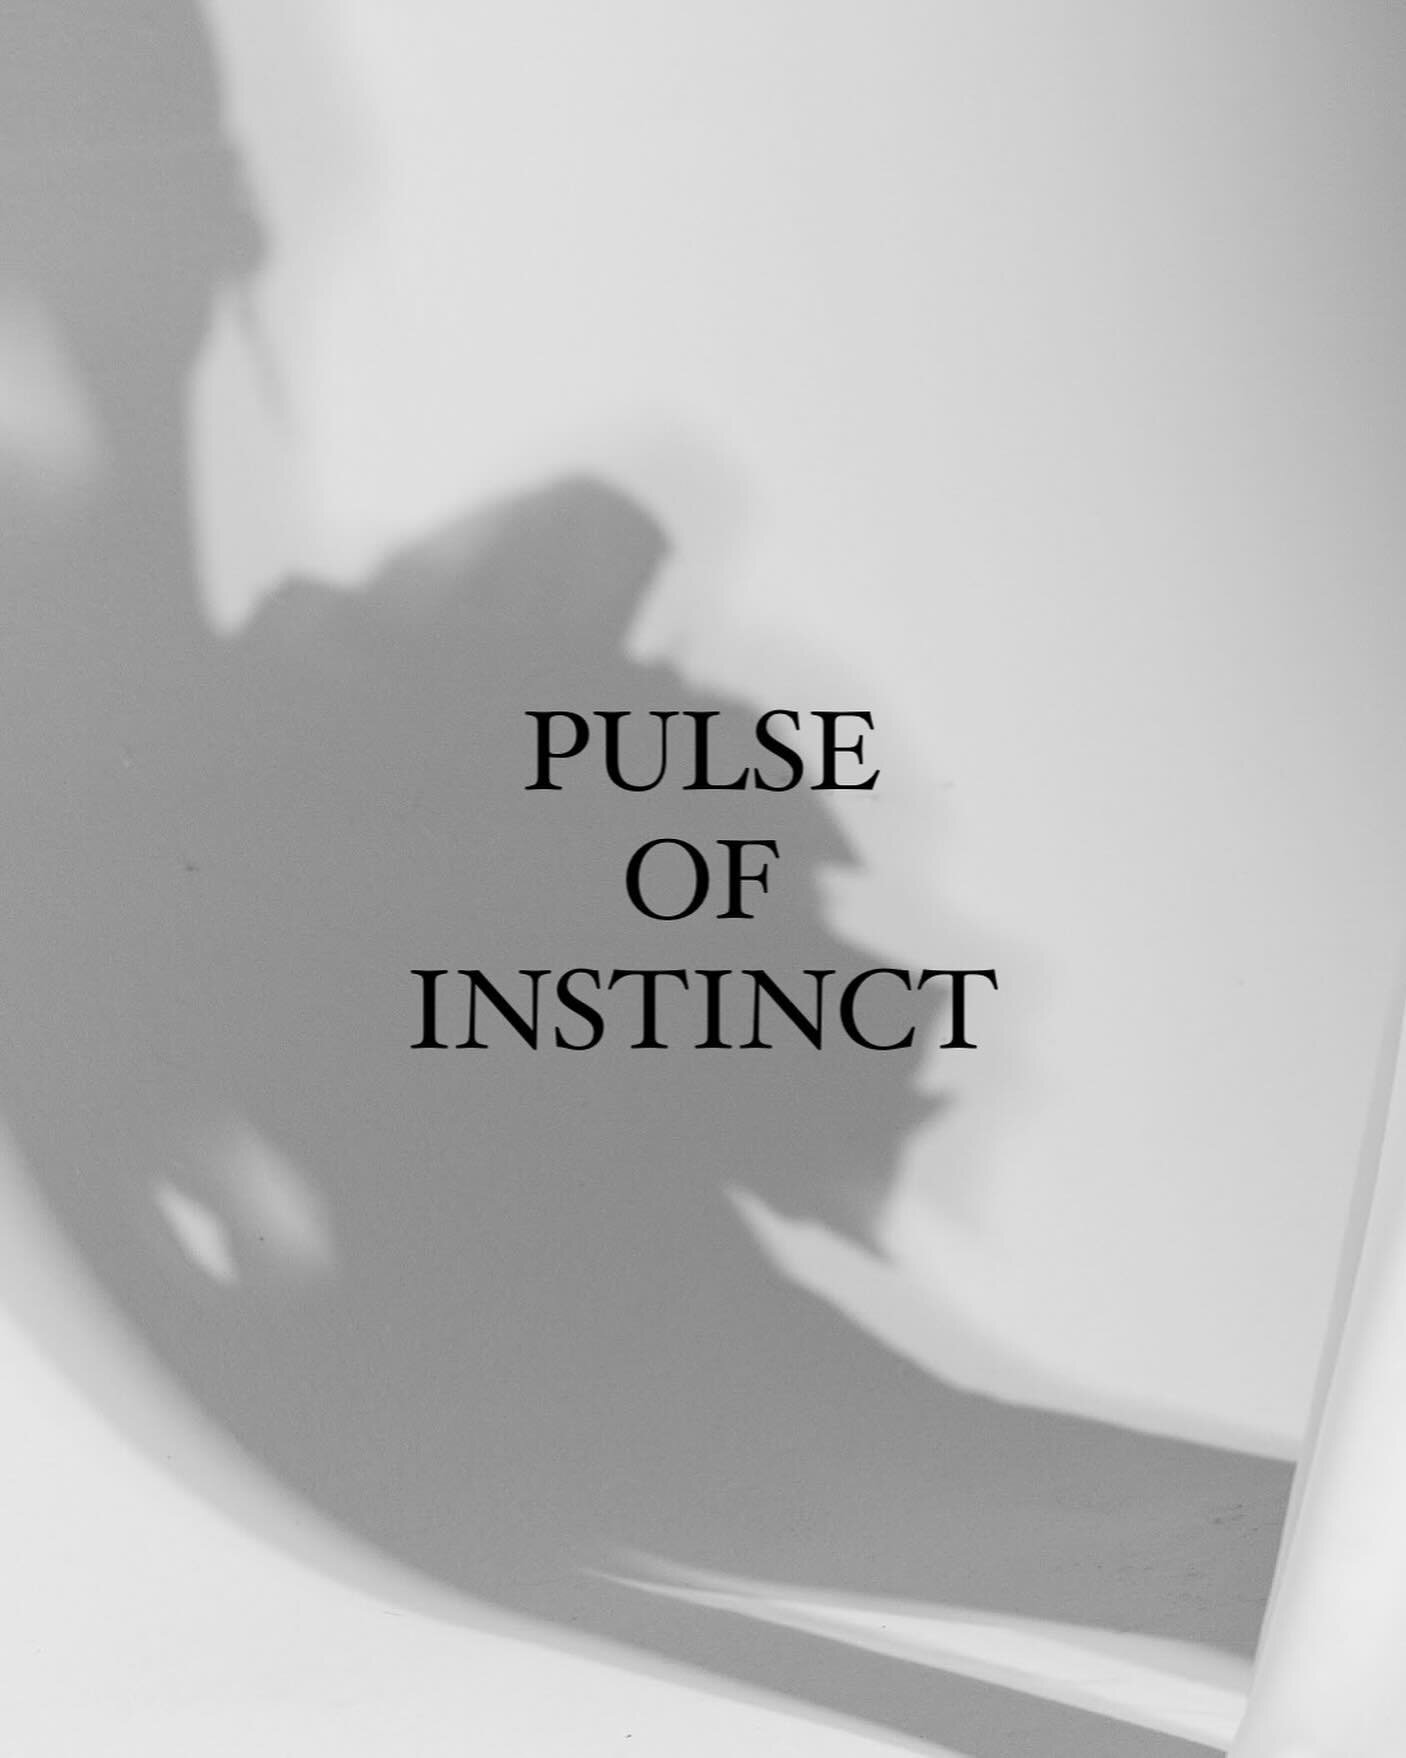 The new collection launches March 25th. It is called &bdquo;PULSE OF INSTINCT&ldquo; and unleashes the power of inner impulse and encourages following one&rsquo;s intuition. For designer Karin Brettmeister, this means freeing oneself from all expecta